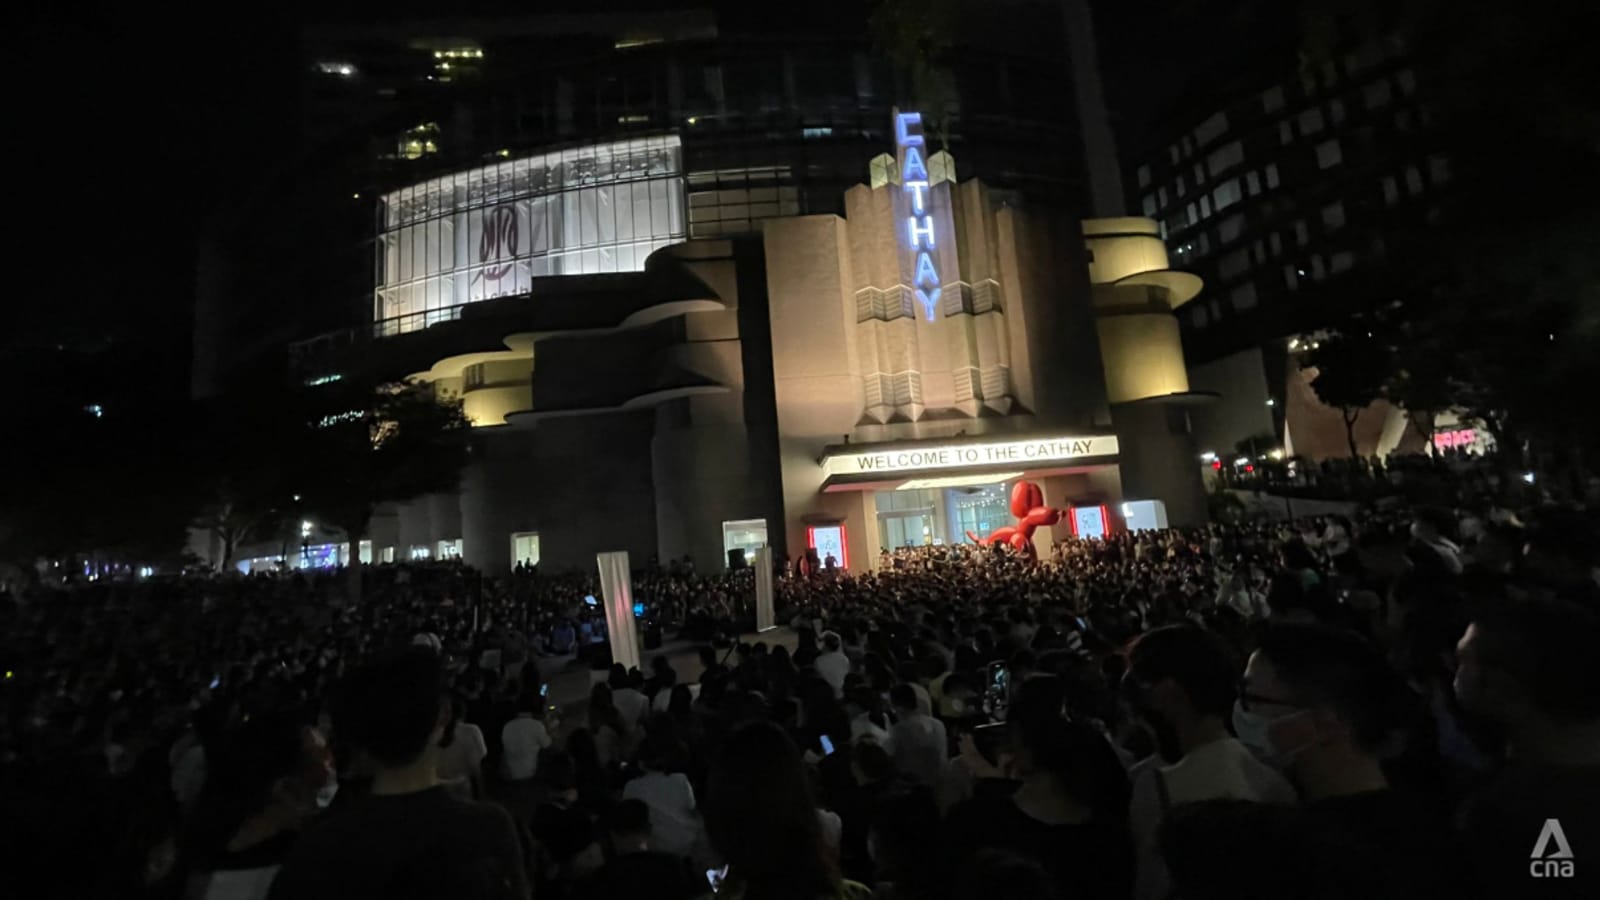 large-crowds-outside-the-cathay-as-people-gather-to-watch-busker-perform